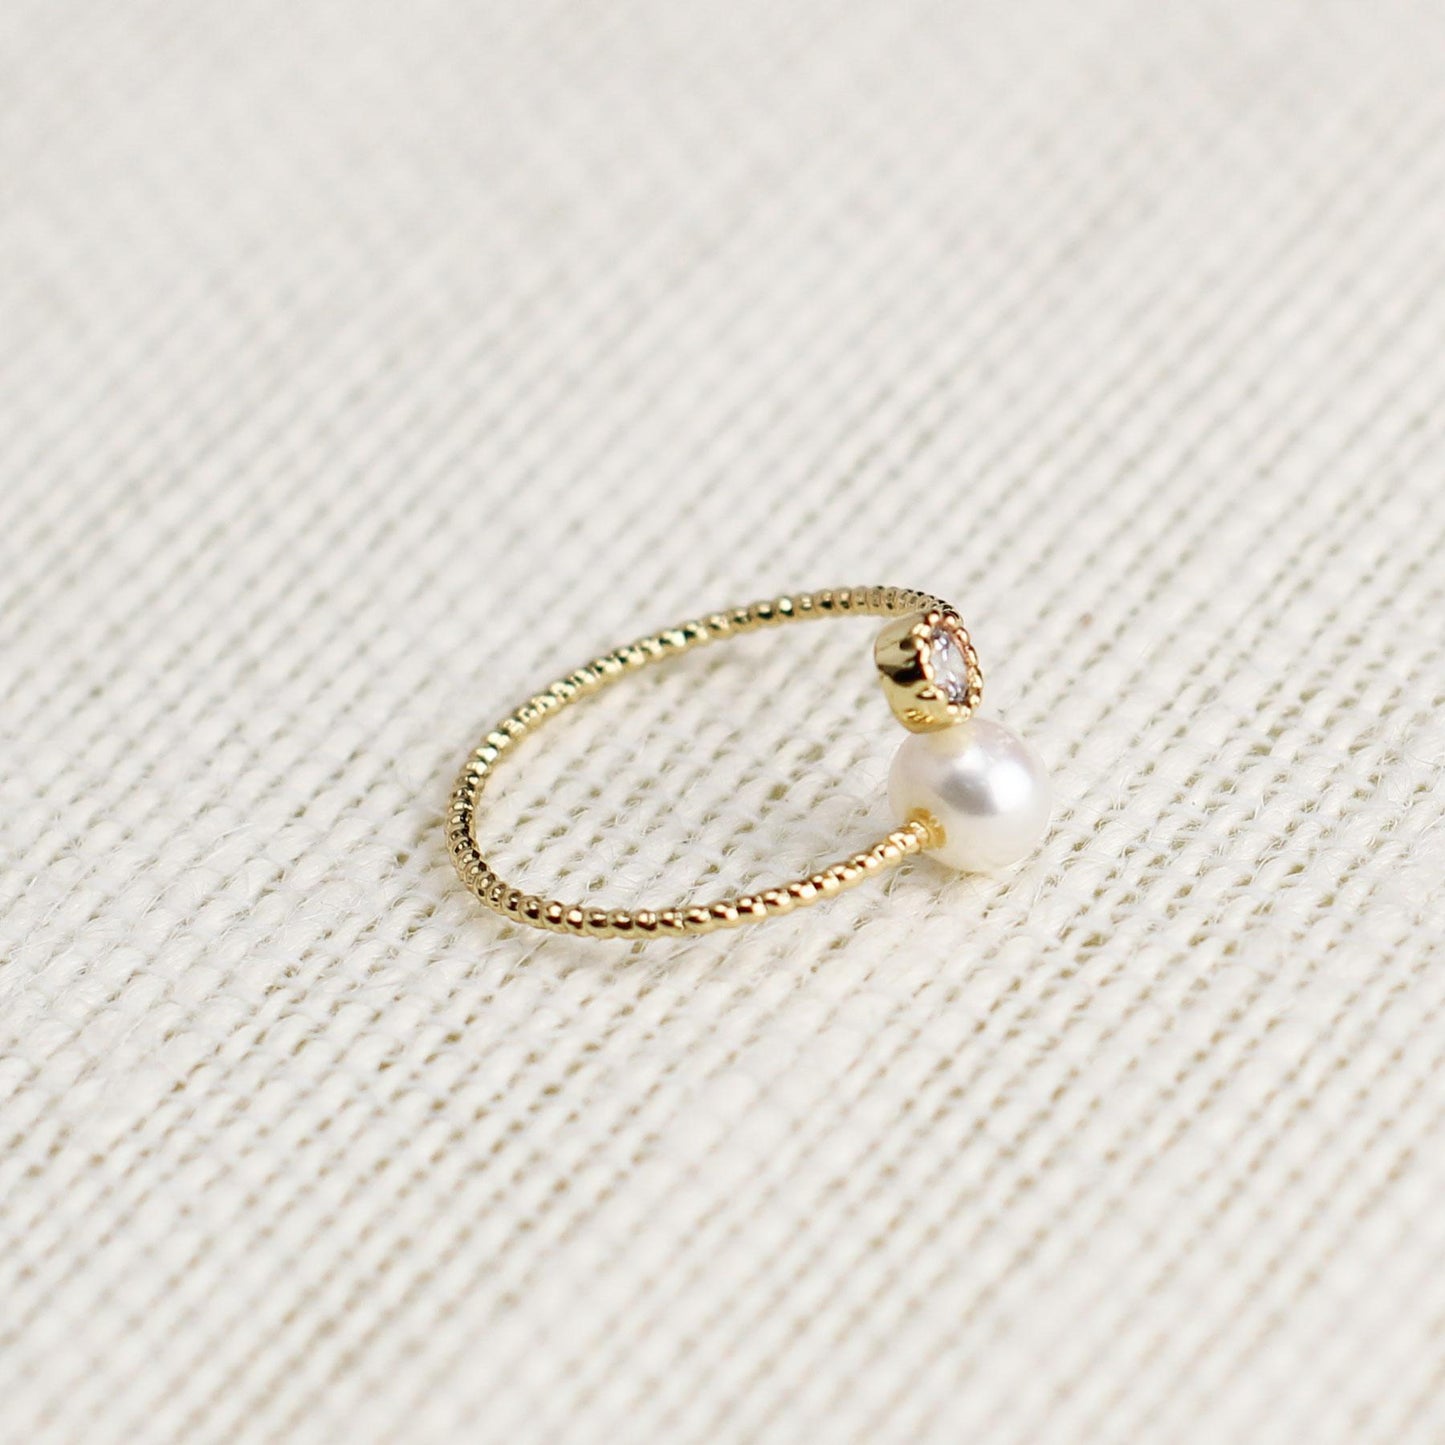 Peculiar Natural Pearls Jewelry Simple Round Open Ring Pearl Stud  Stainless Gold Plated Adjustable